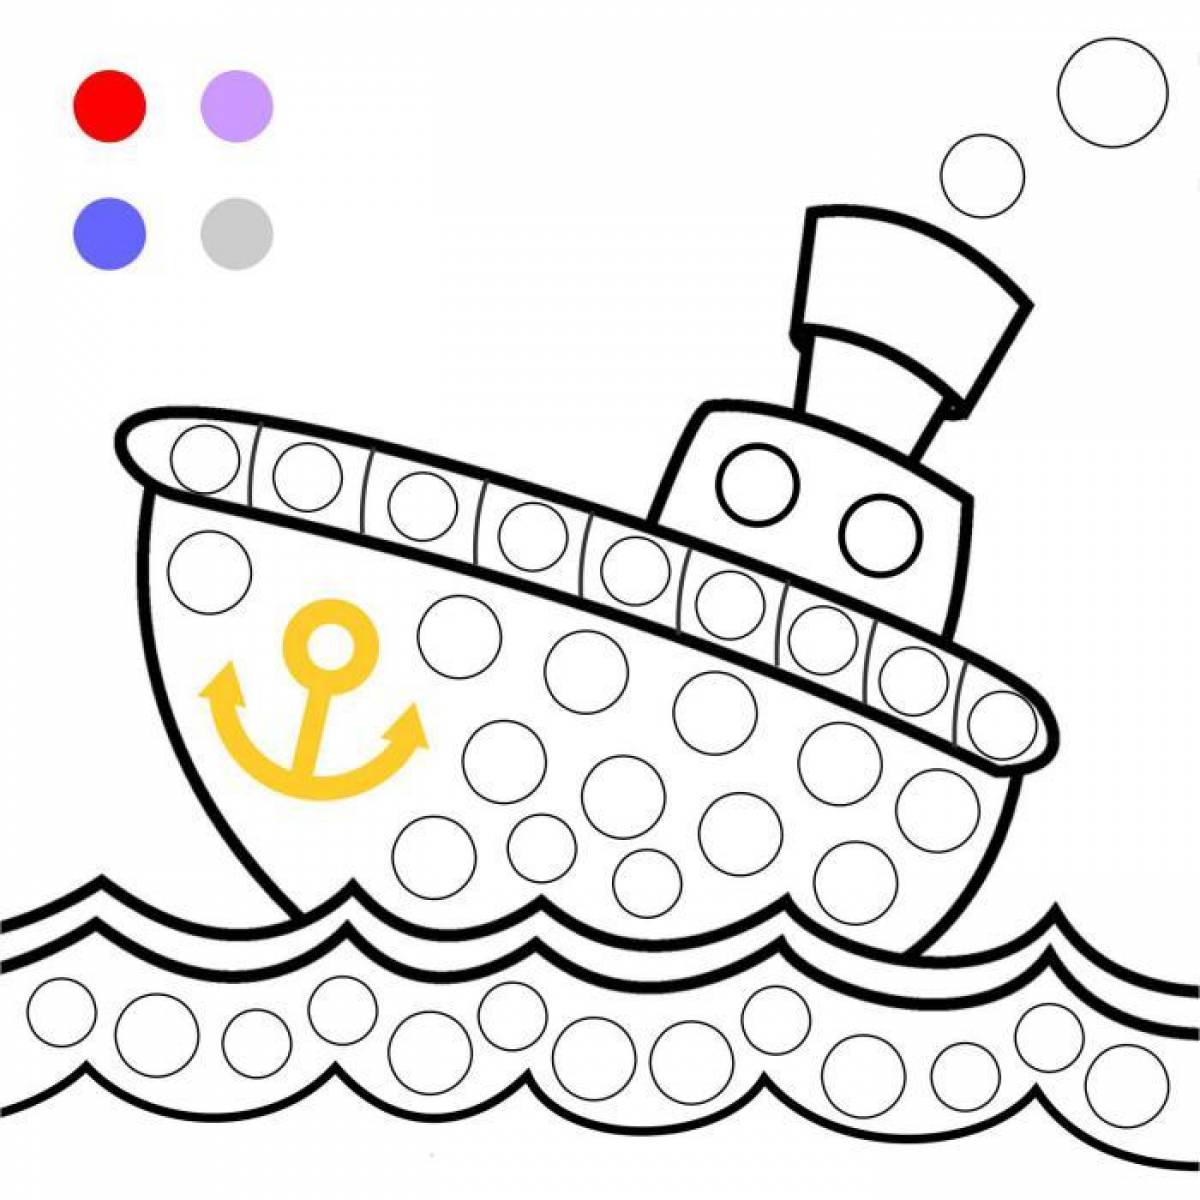 Ship coloring pages